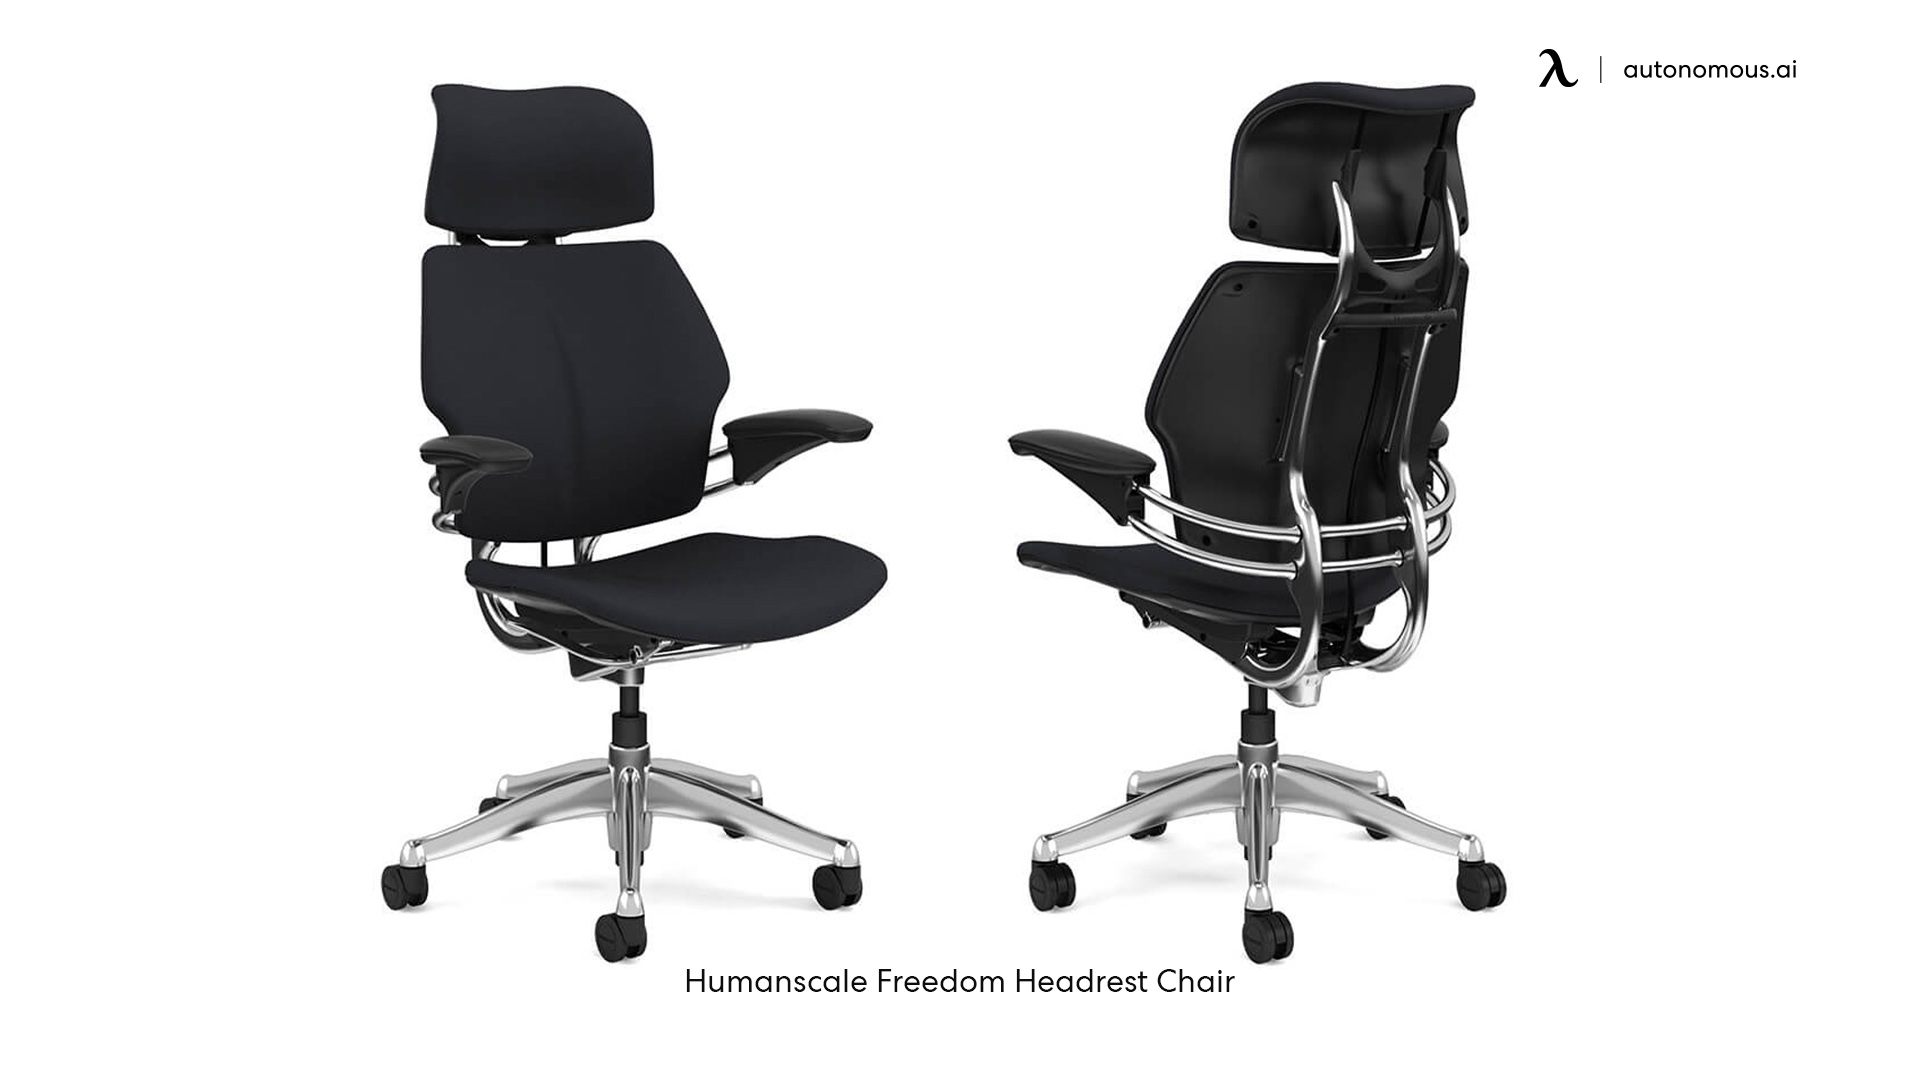 Freedom Chair by Humanscale